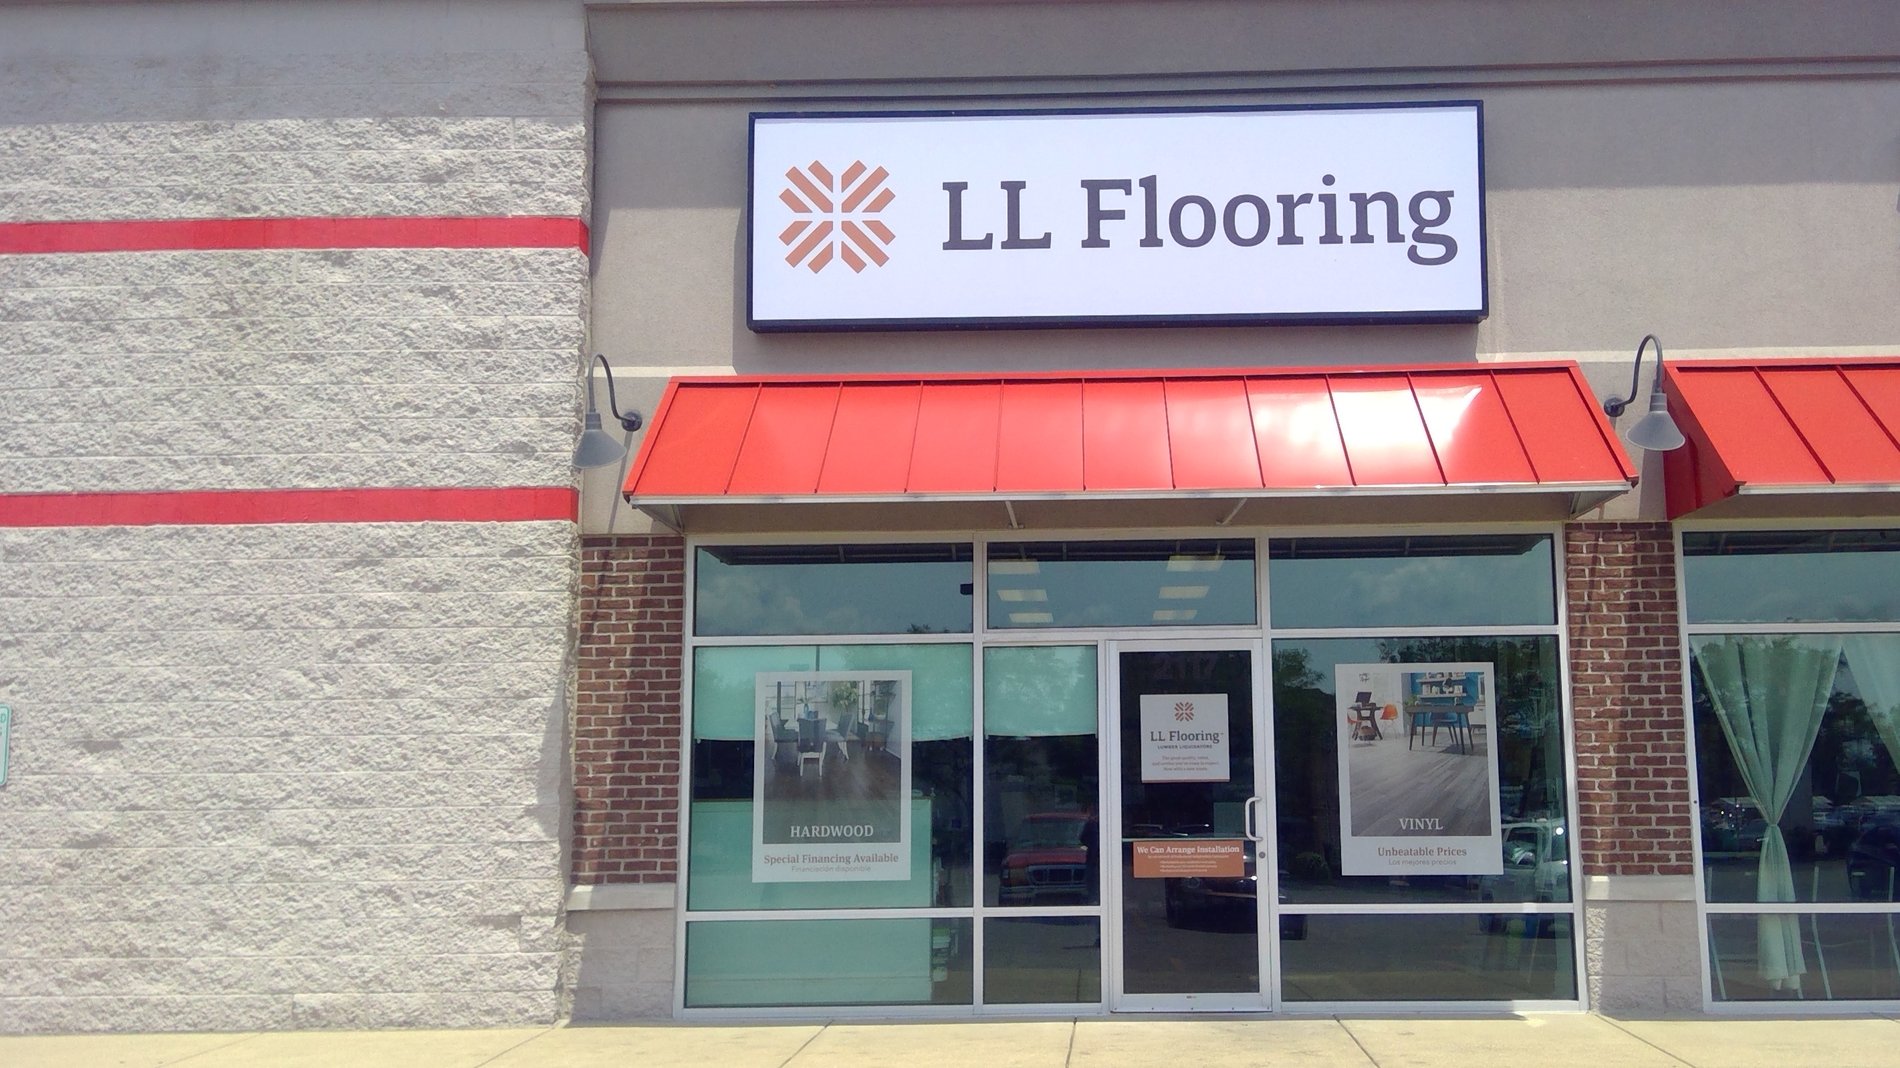 LL Flooring #1244 Greenwood | 2117 Independence Drive | Storefront